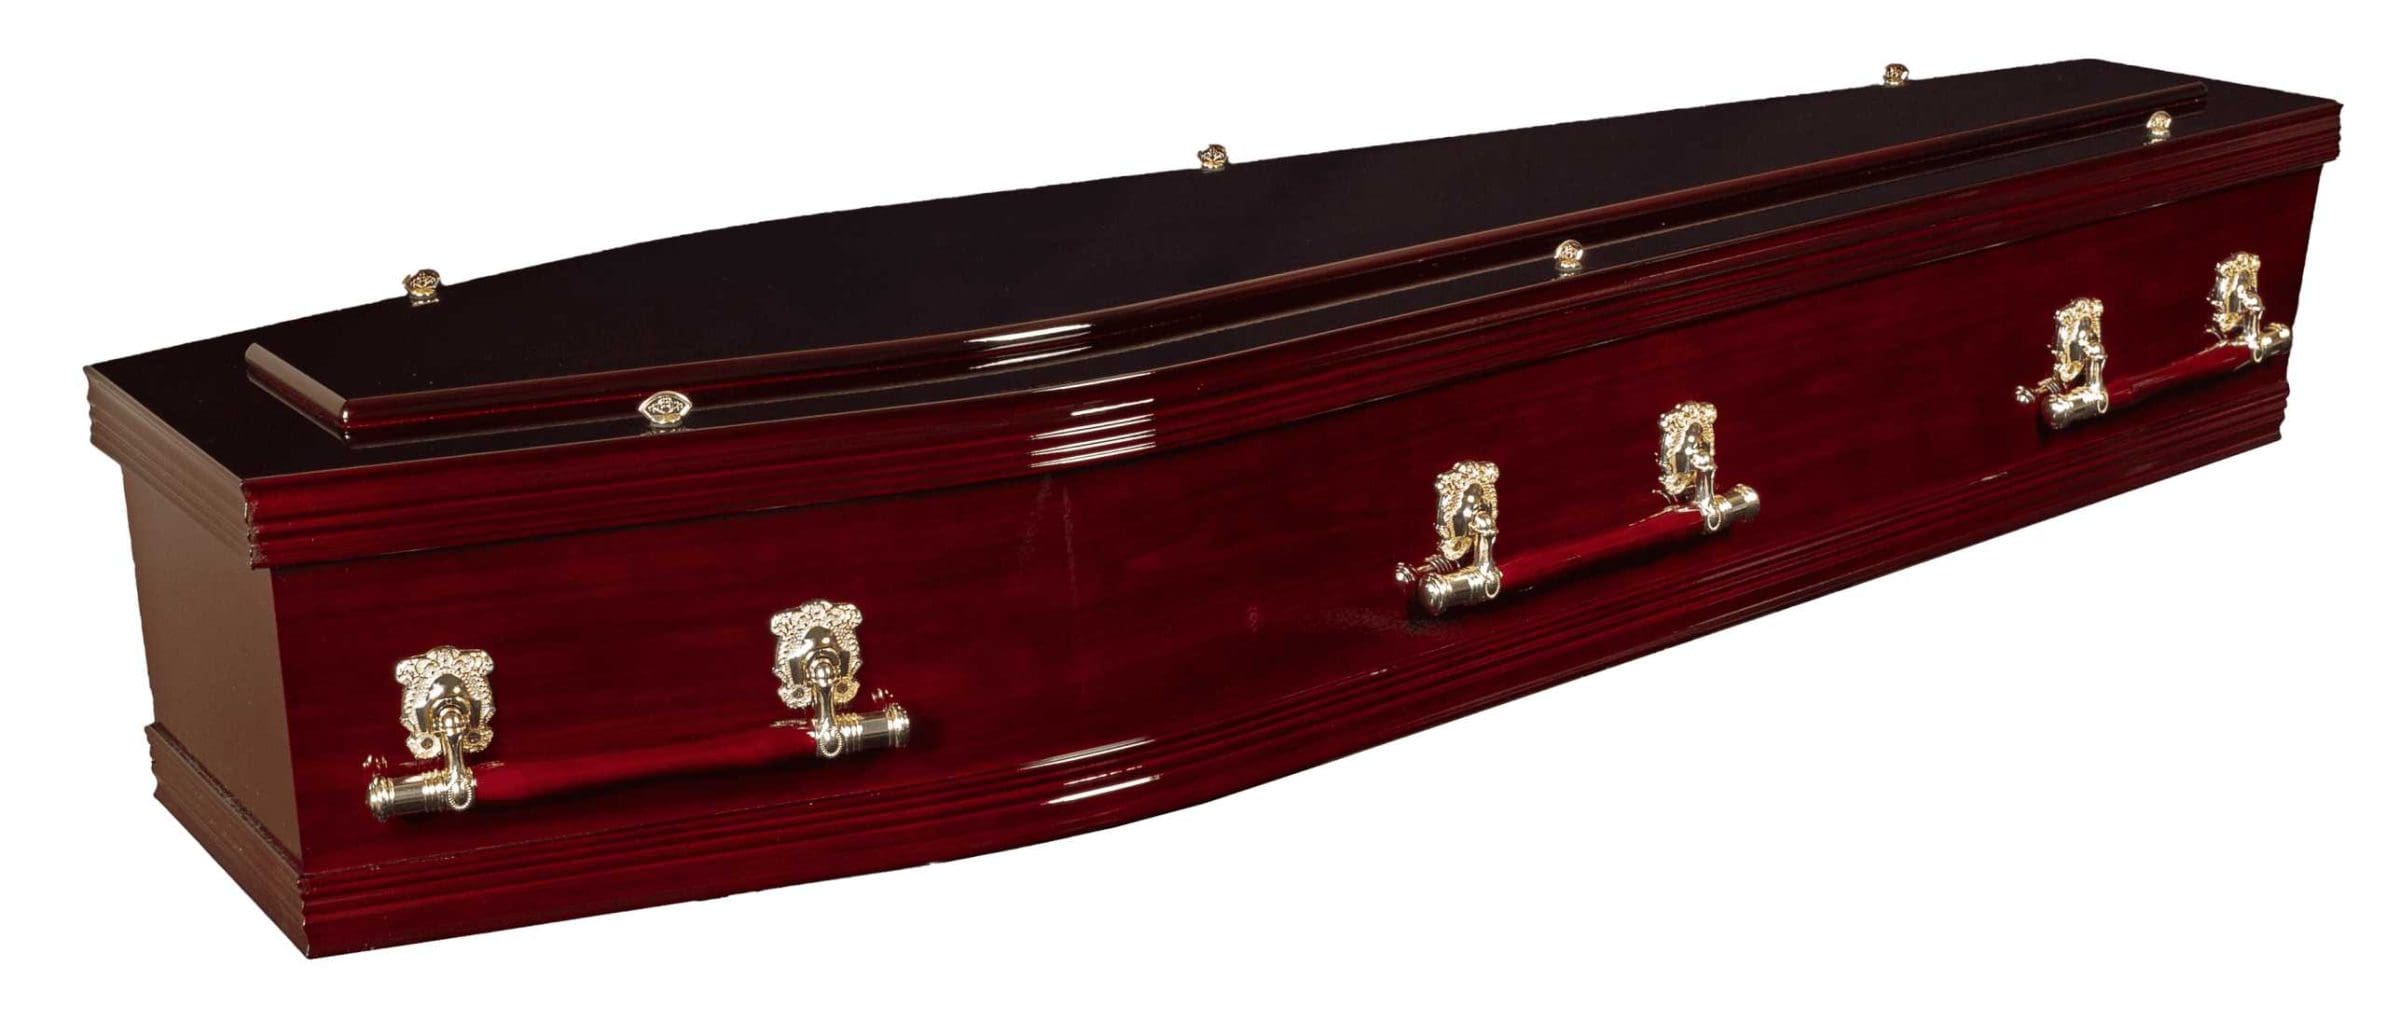 Paterson High Gloss Rosewood Stained Finished Coffin by Fry Bros Funerals in Maitland